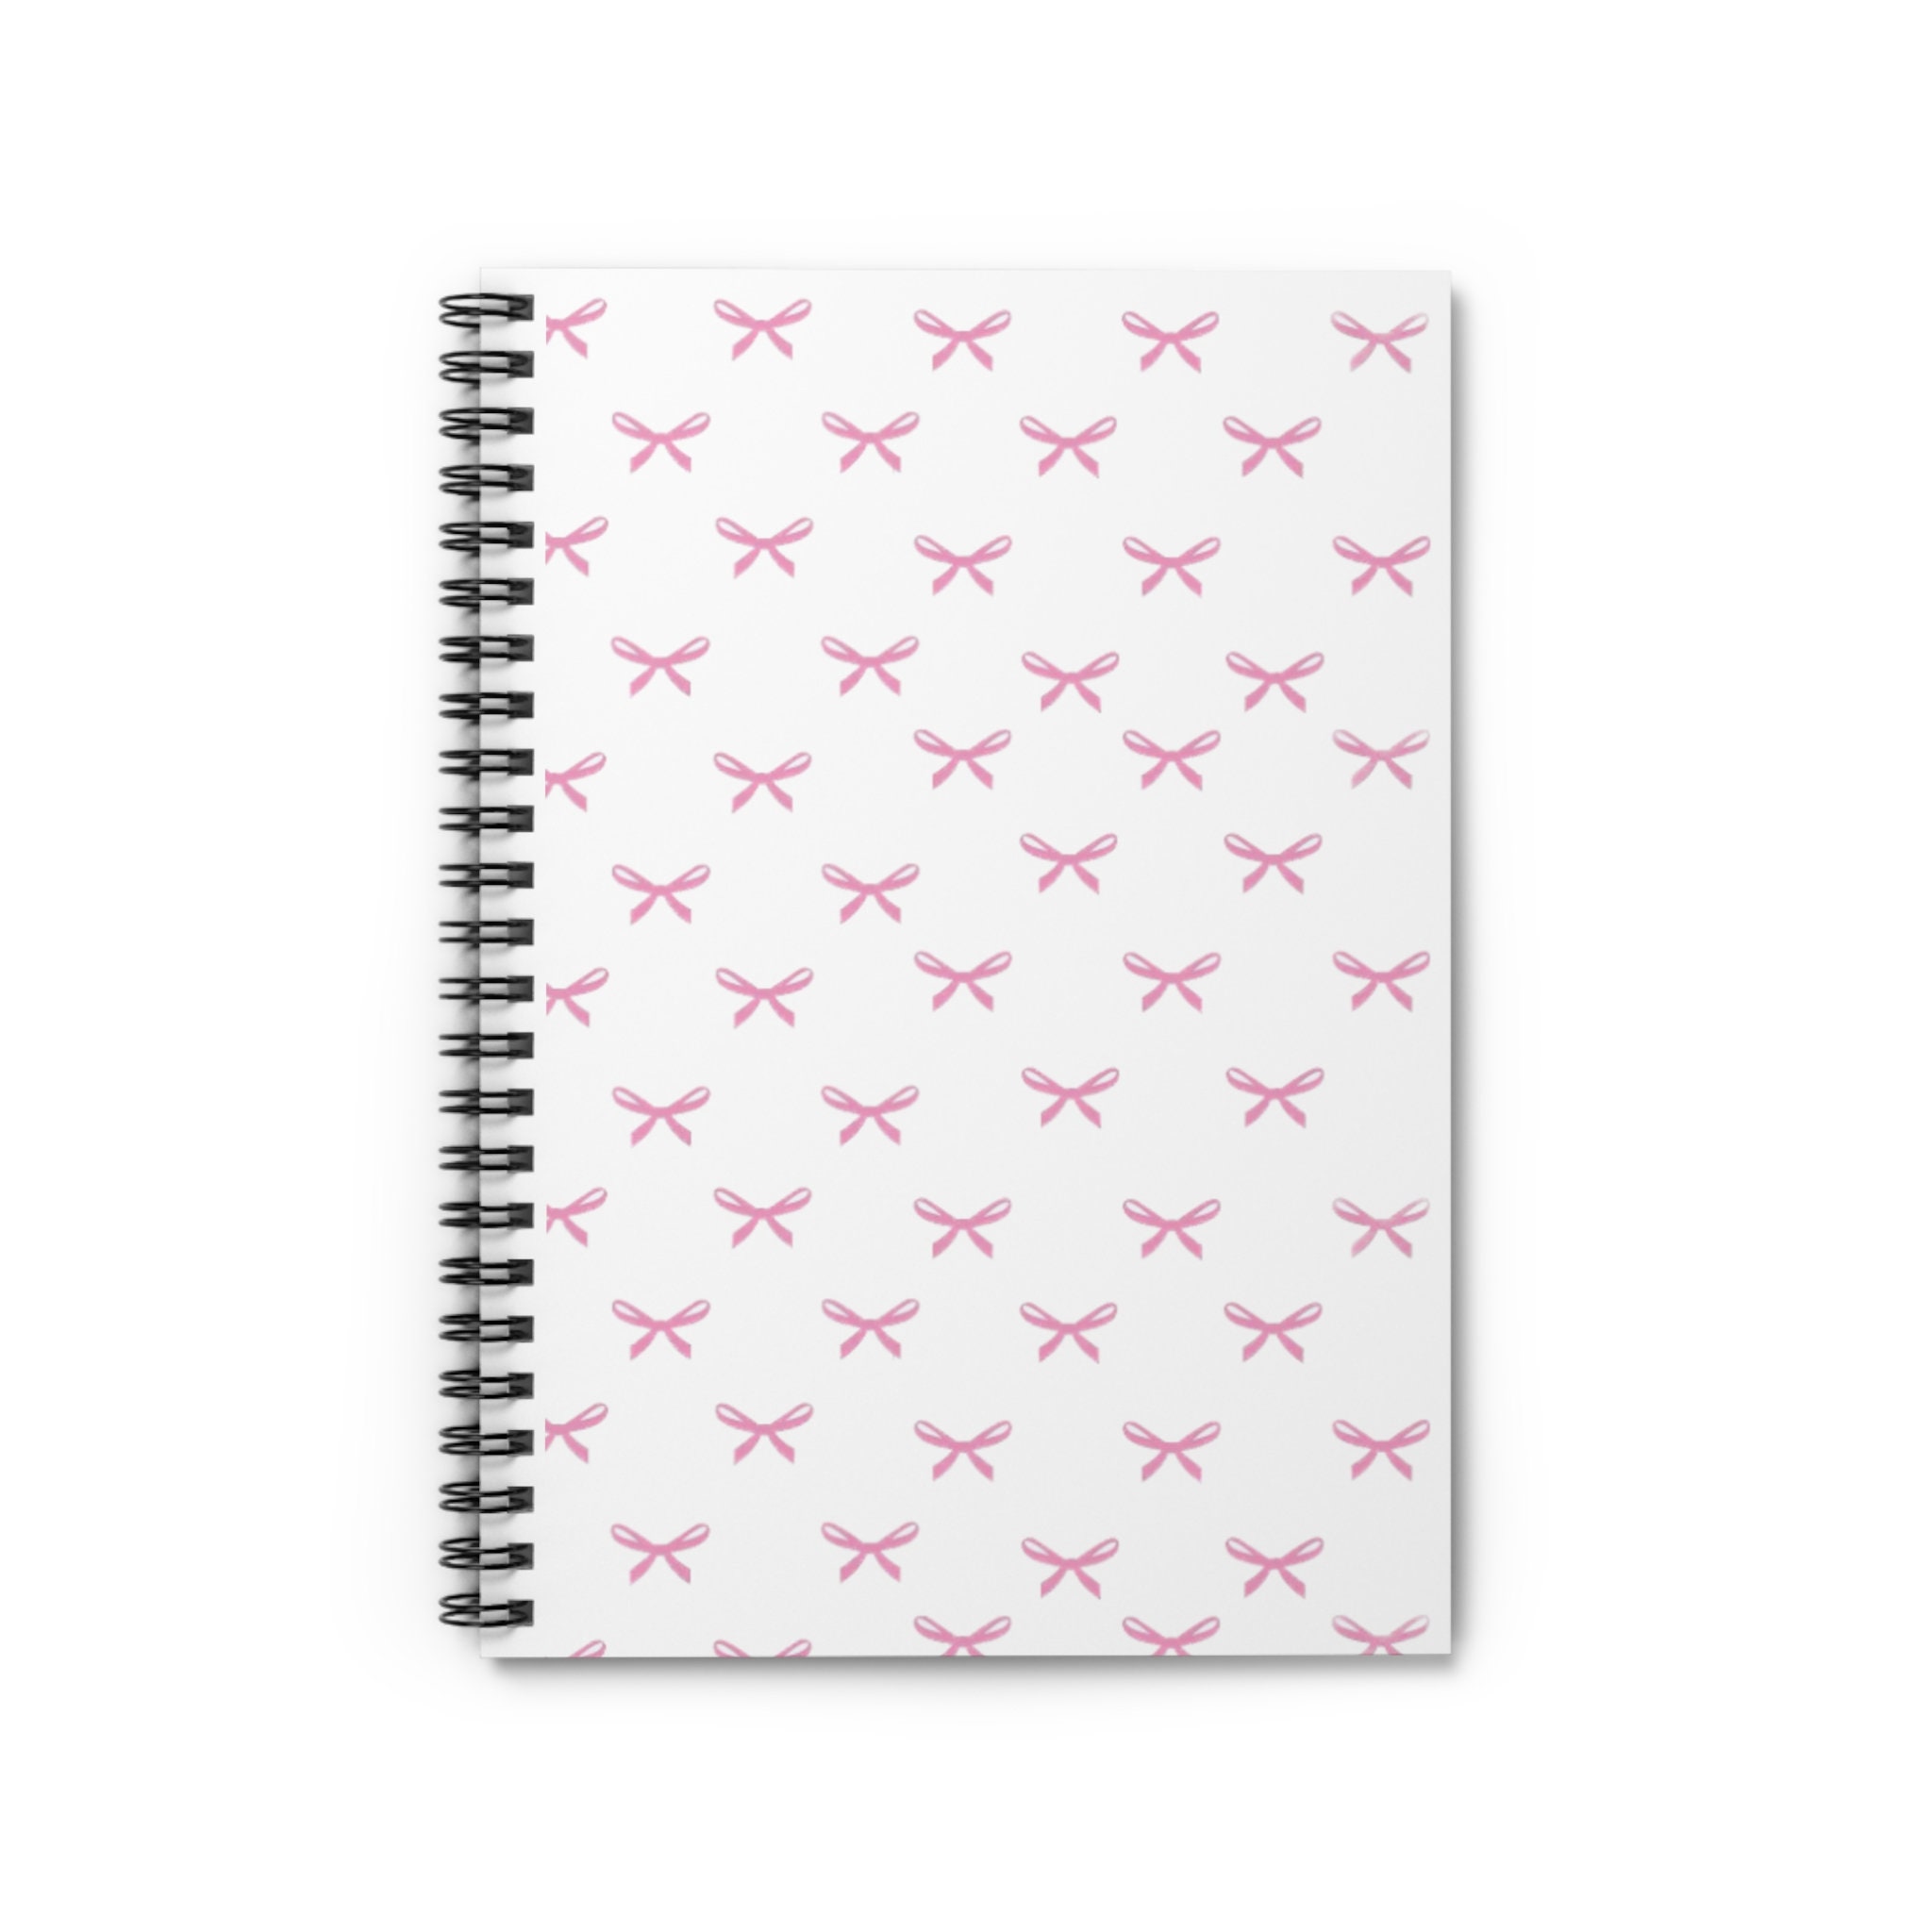 Coquette Journal, Coquette Diary, Coquette Stationary, Coquette Aesthetic  Journal, Hardcover Journal, Teen Gift, Aesthetic Notebook, Pink 